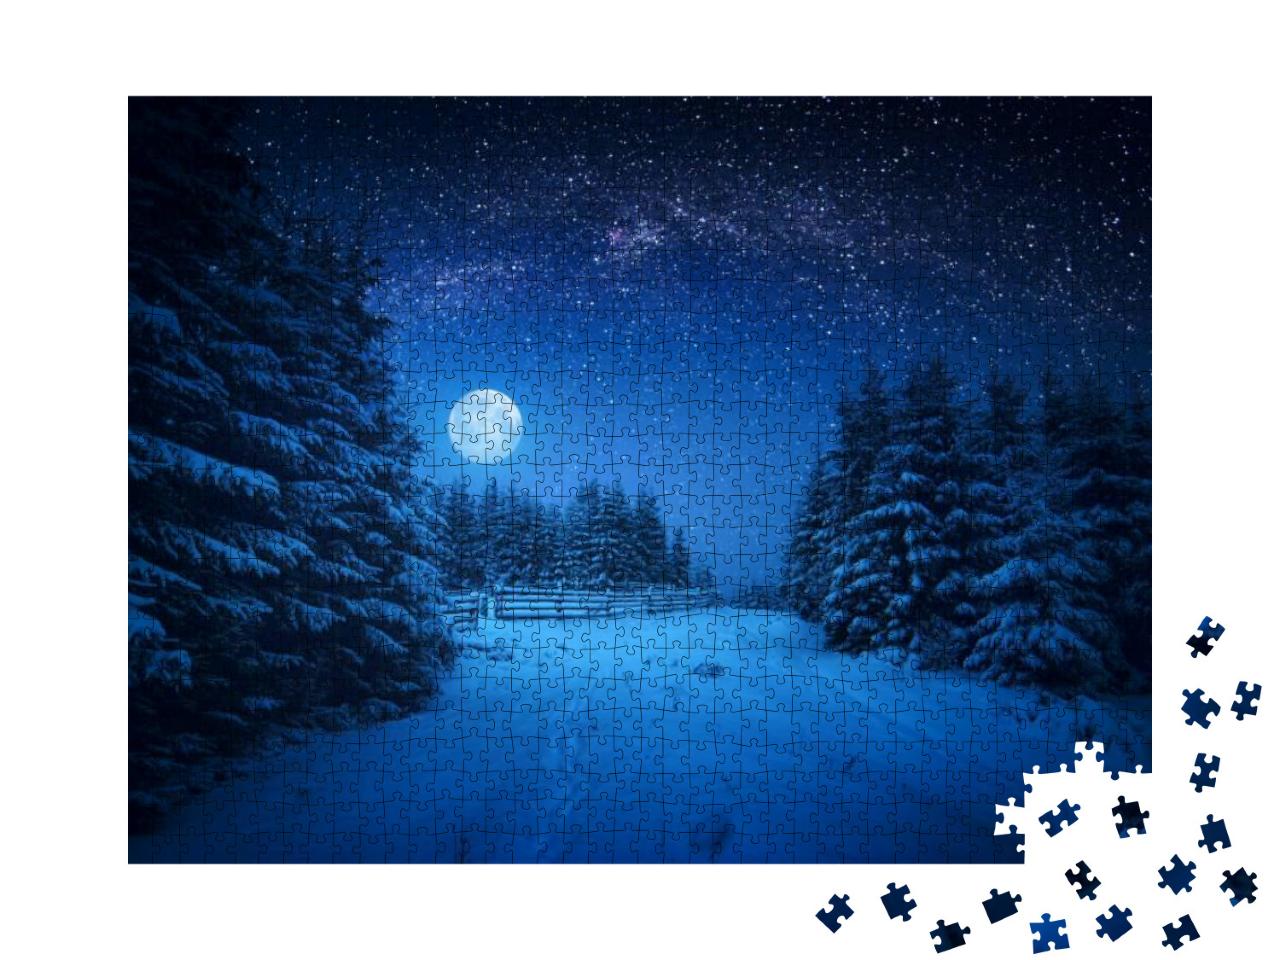 Full Moon Rising Above the Winter Forest Covered with Fre... Jigsaw Puzzle with 1000 pieces